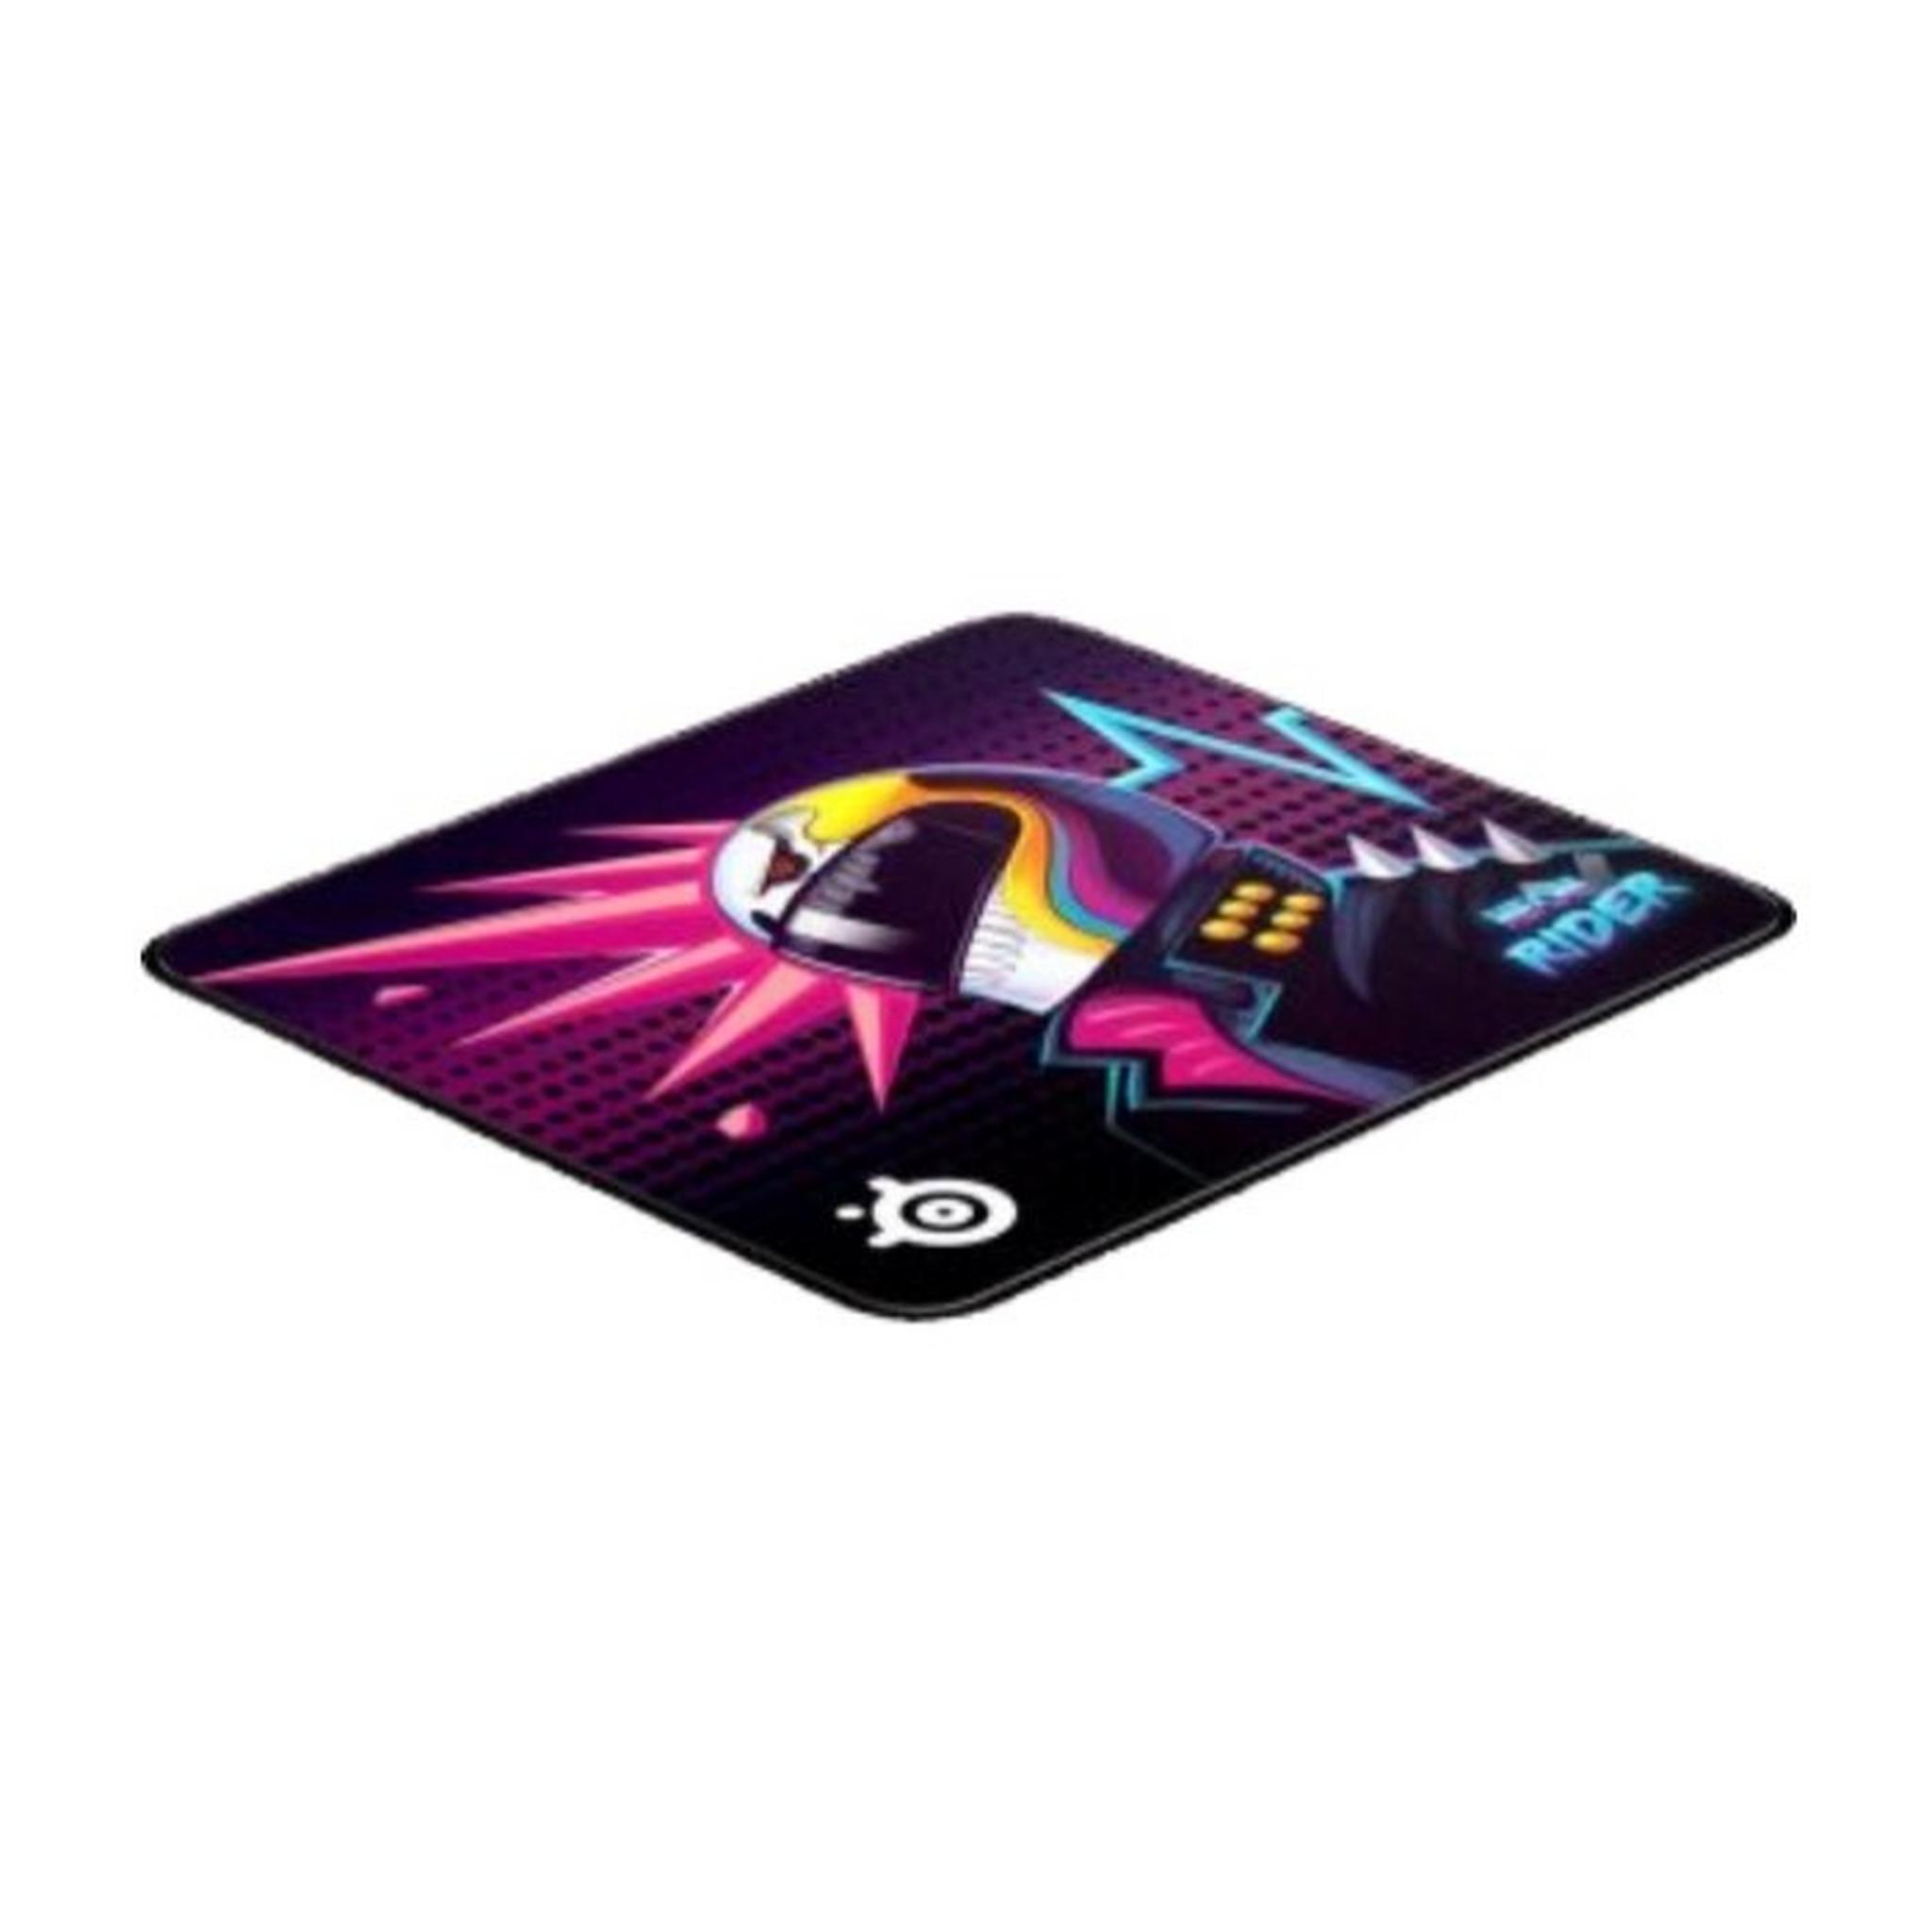 Steelseries Qck Large Mousepad Neon Rider Edition